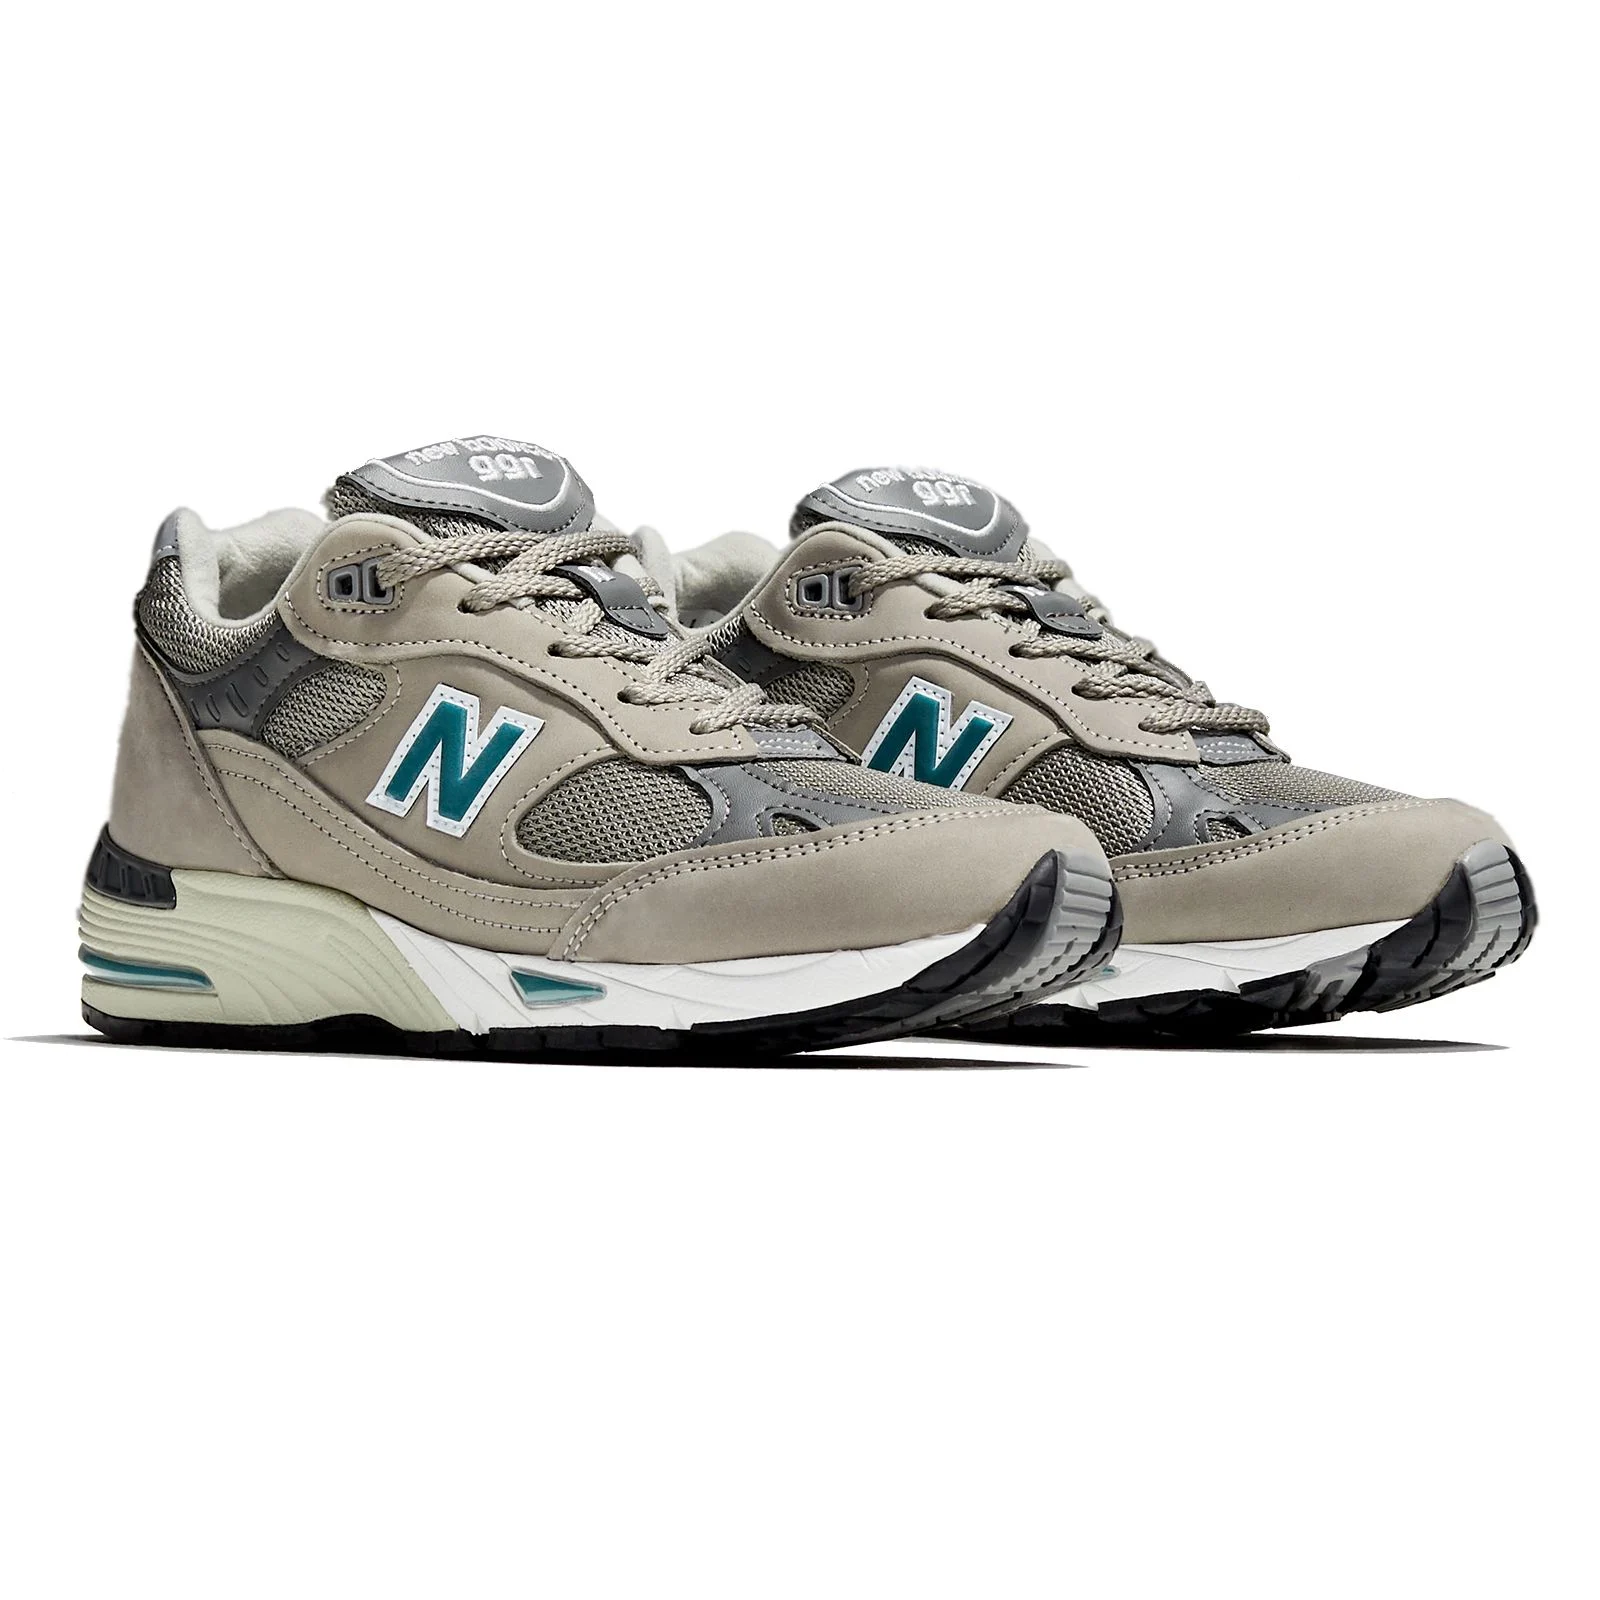 Now Available: New Balance 991 UK 